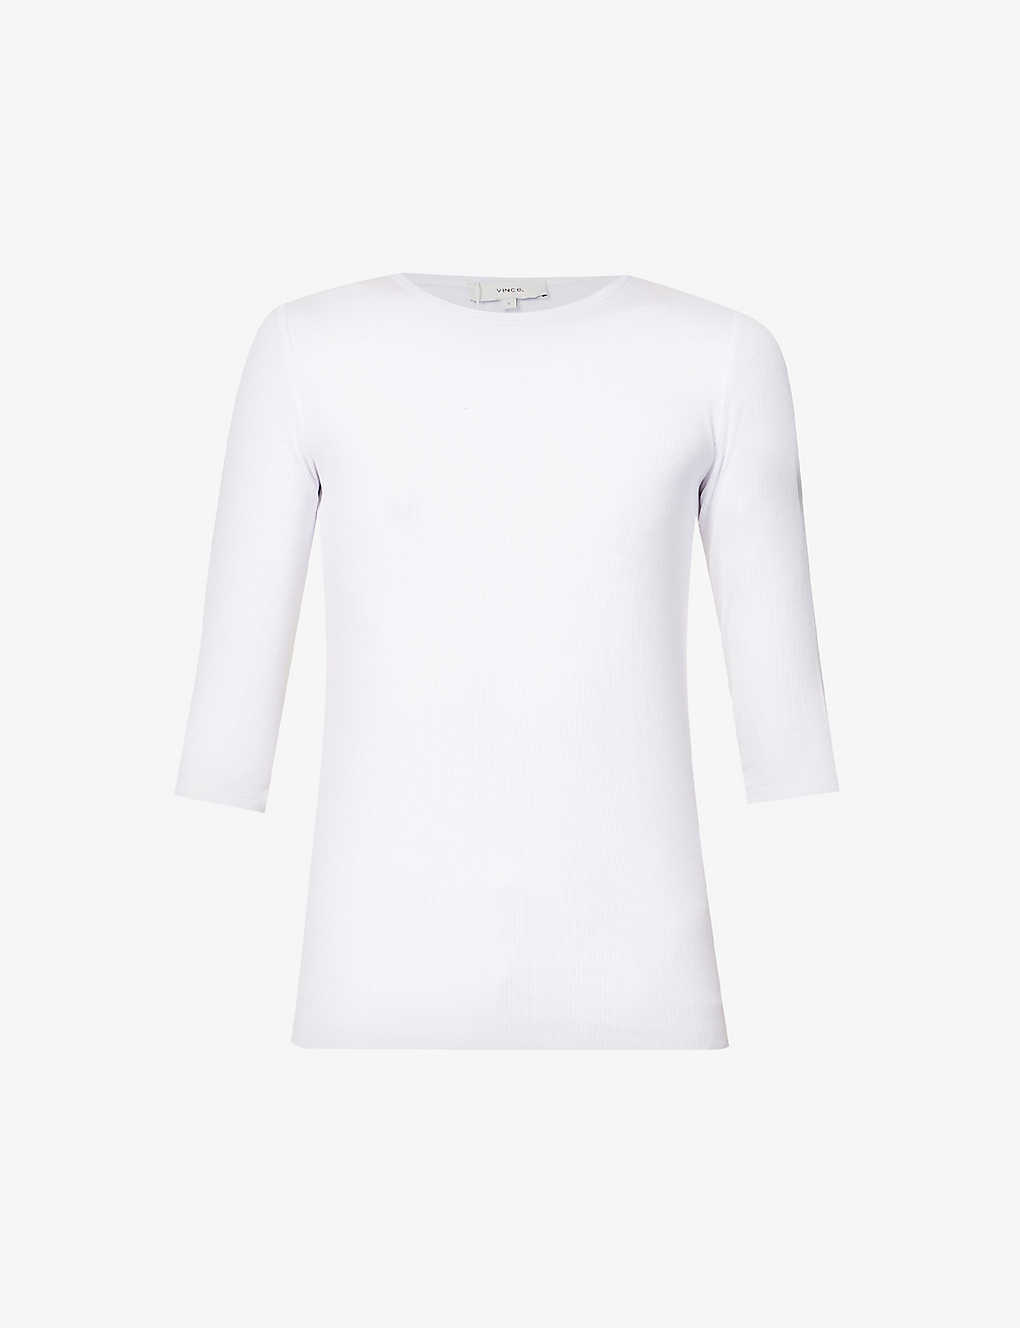 Shop Vince Women's Optic White Three Quarter-length Sleeve Ribbed Stretch-woven Top